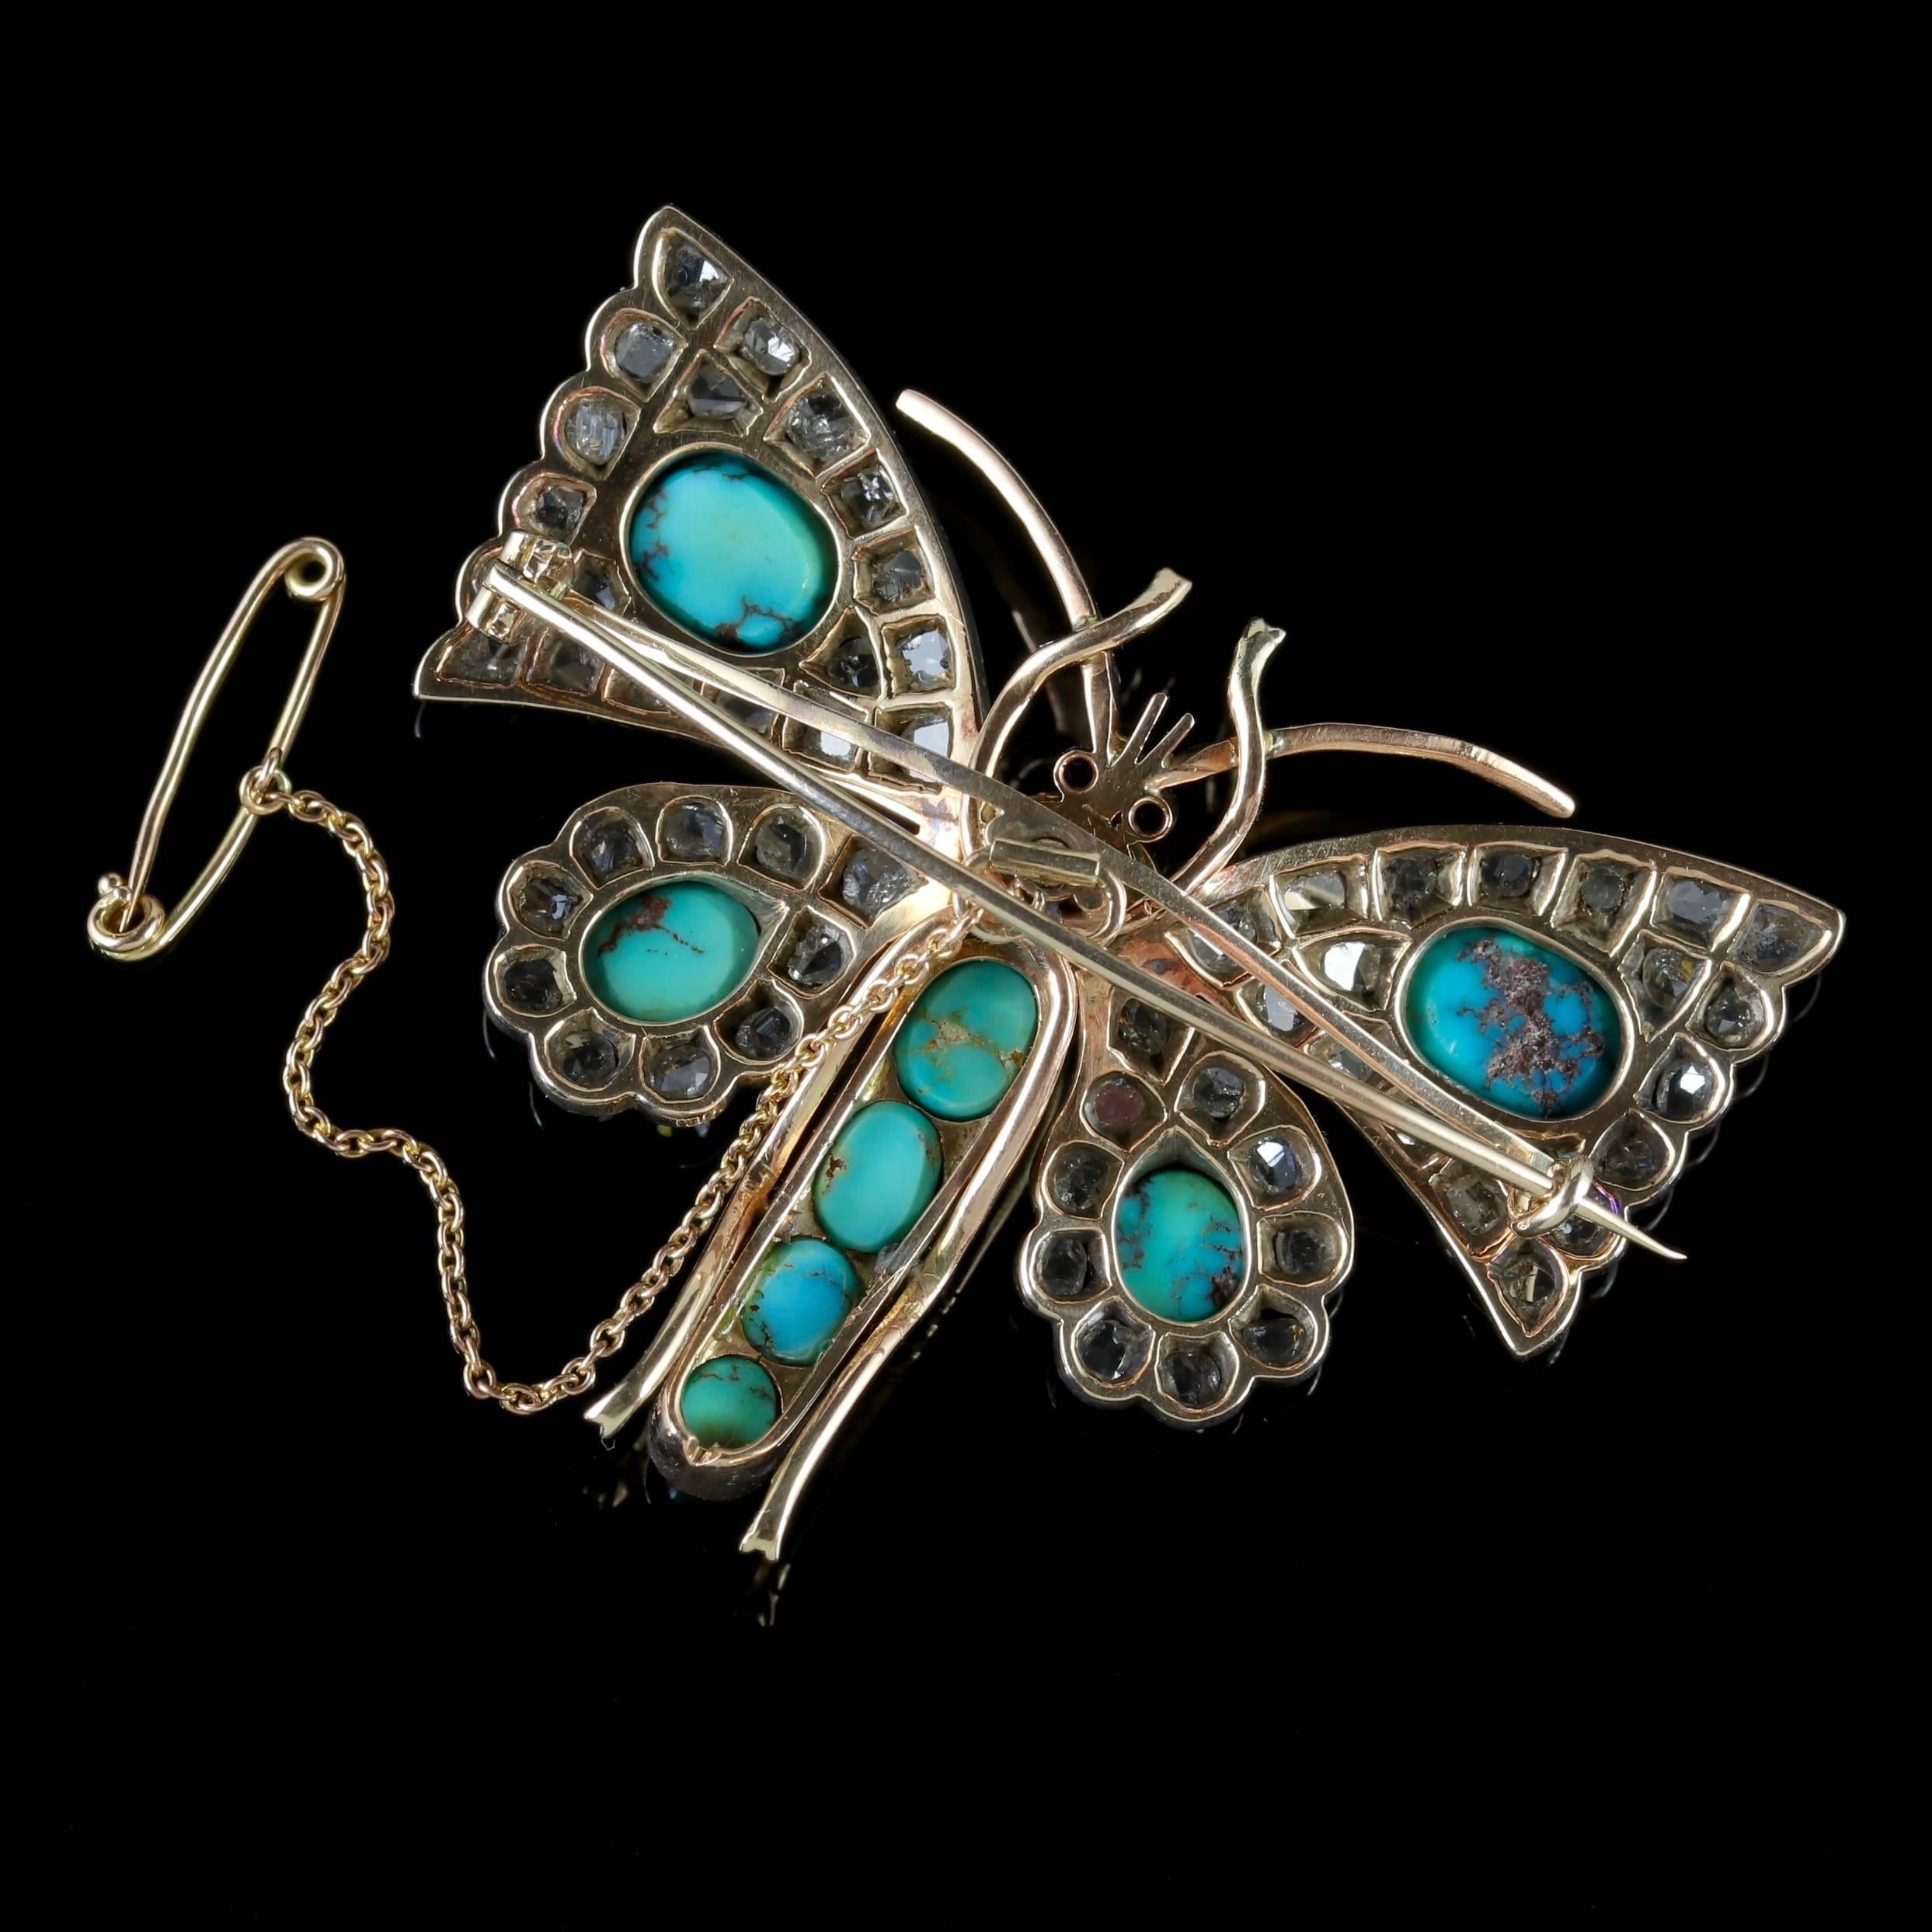 Antique Victorian Butterfly Brooch Turquoise Diamond 18 Carat Gold, circa 1860 For Sale 1